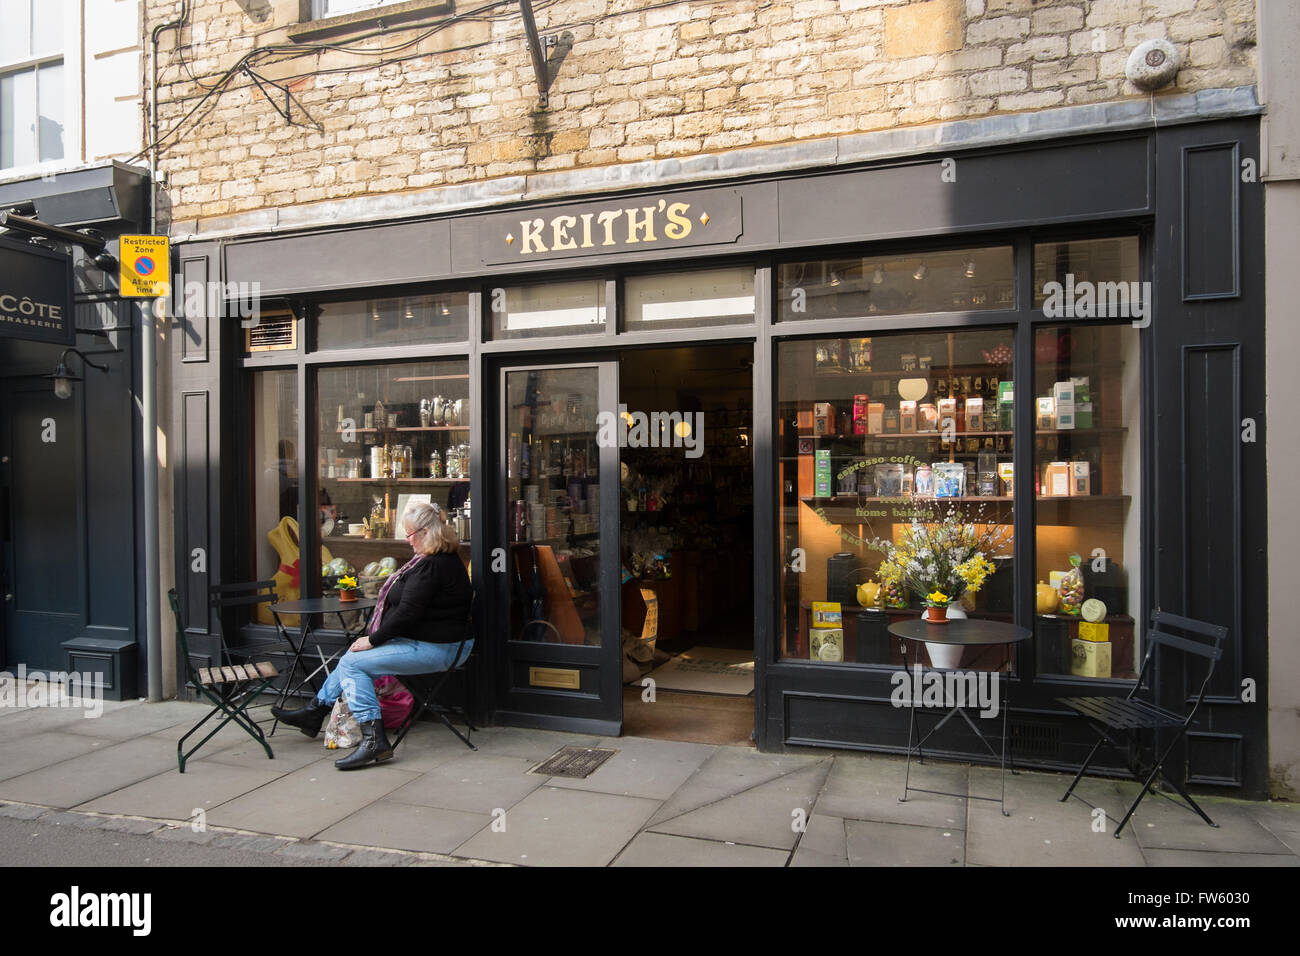 Keith's coffee house dans Jack Black Street, Cirencester, Gloucestershire, Royaume-Uni Banque D'Images